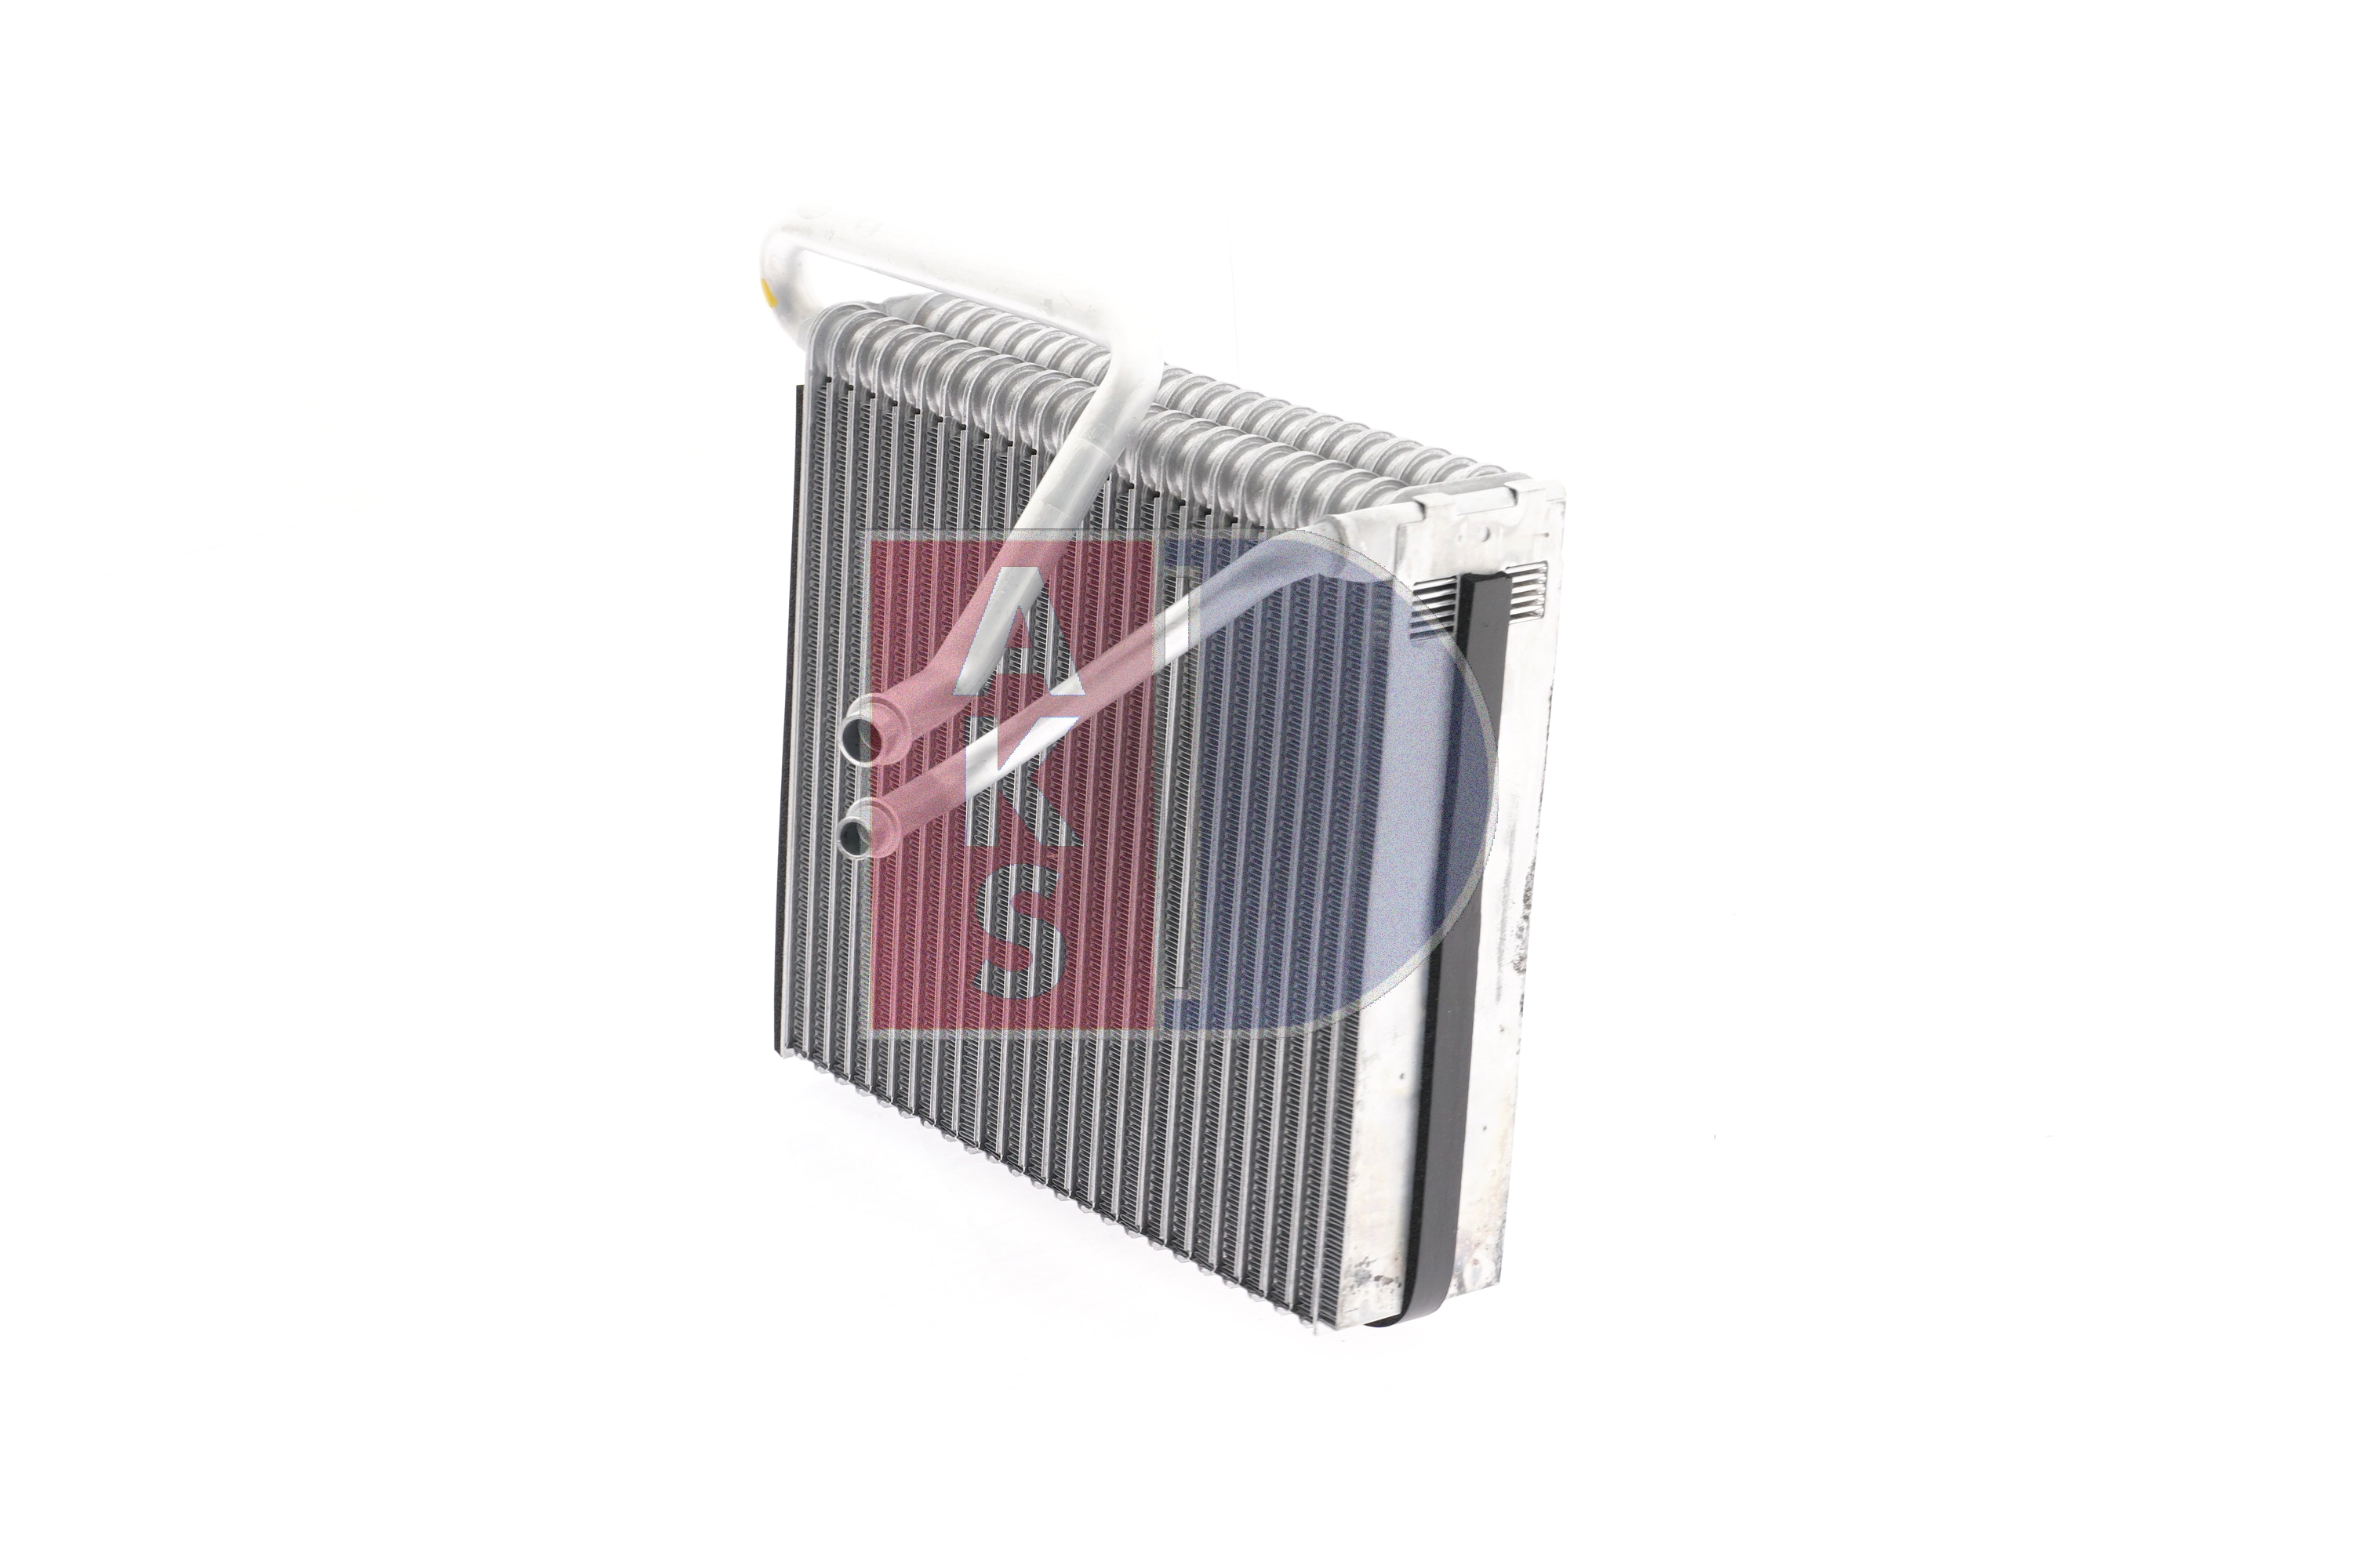 Chevrolet Air conditioning evaporator AKS DASIS 821160N at a good price